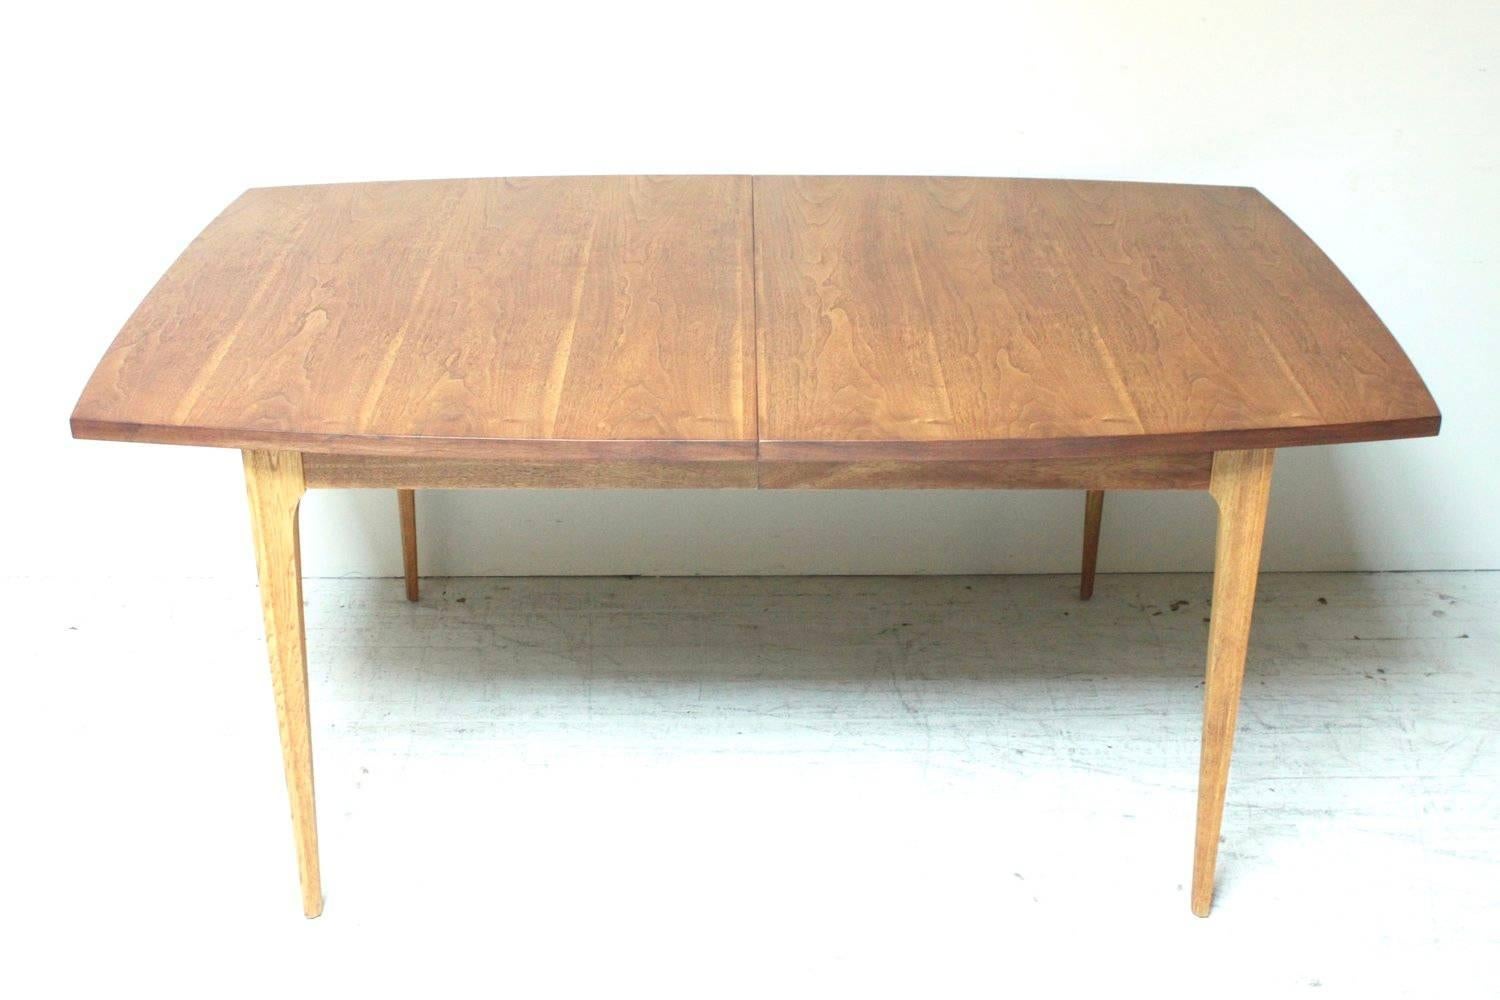 Midcentury walnut dining table with one 12